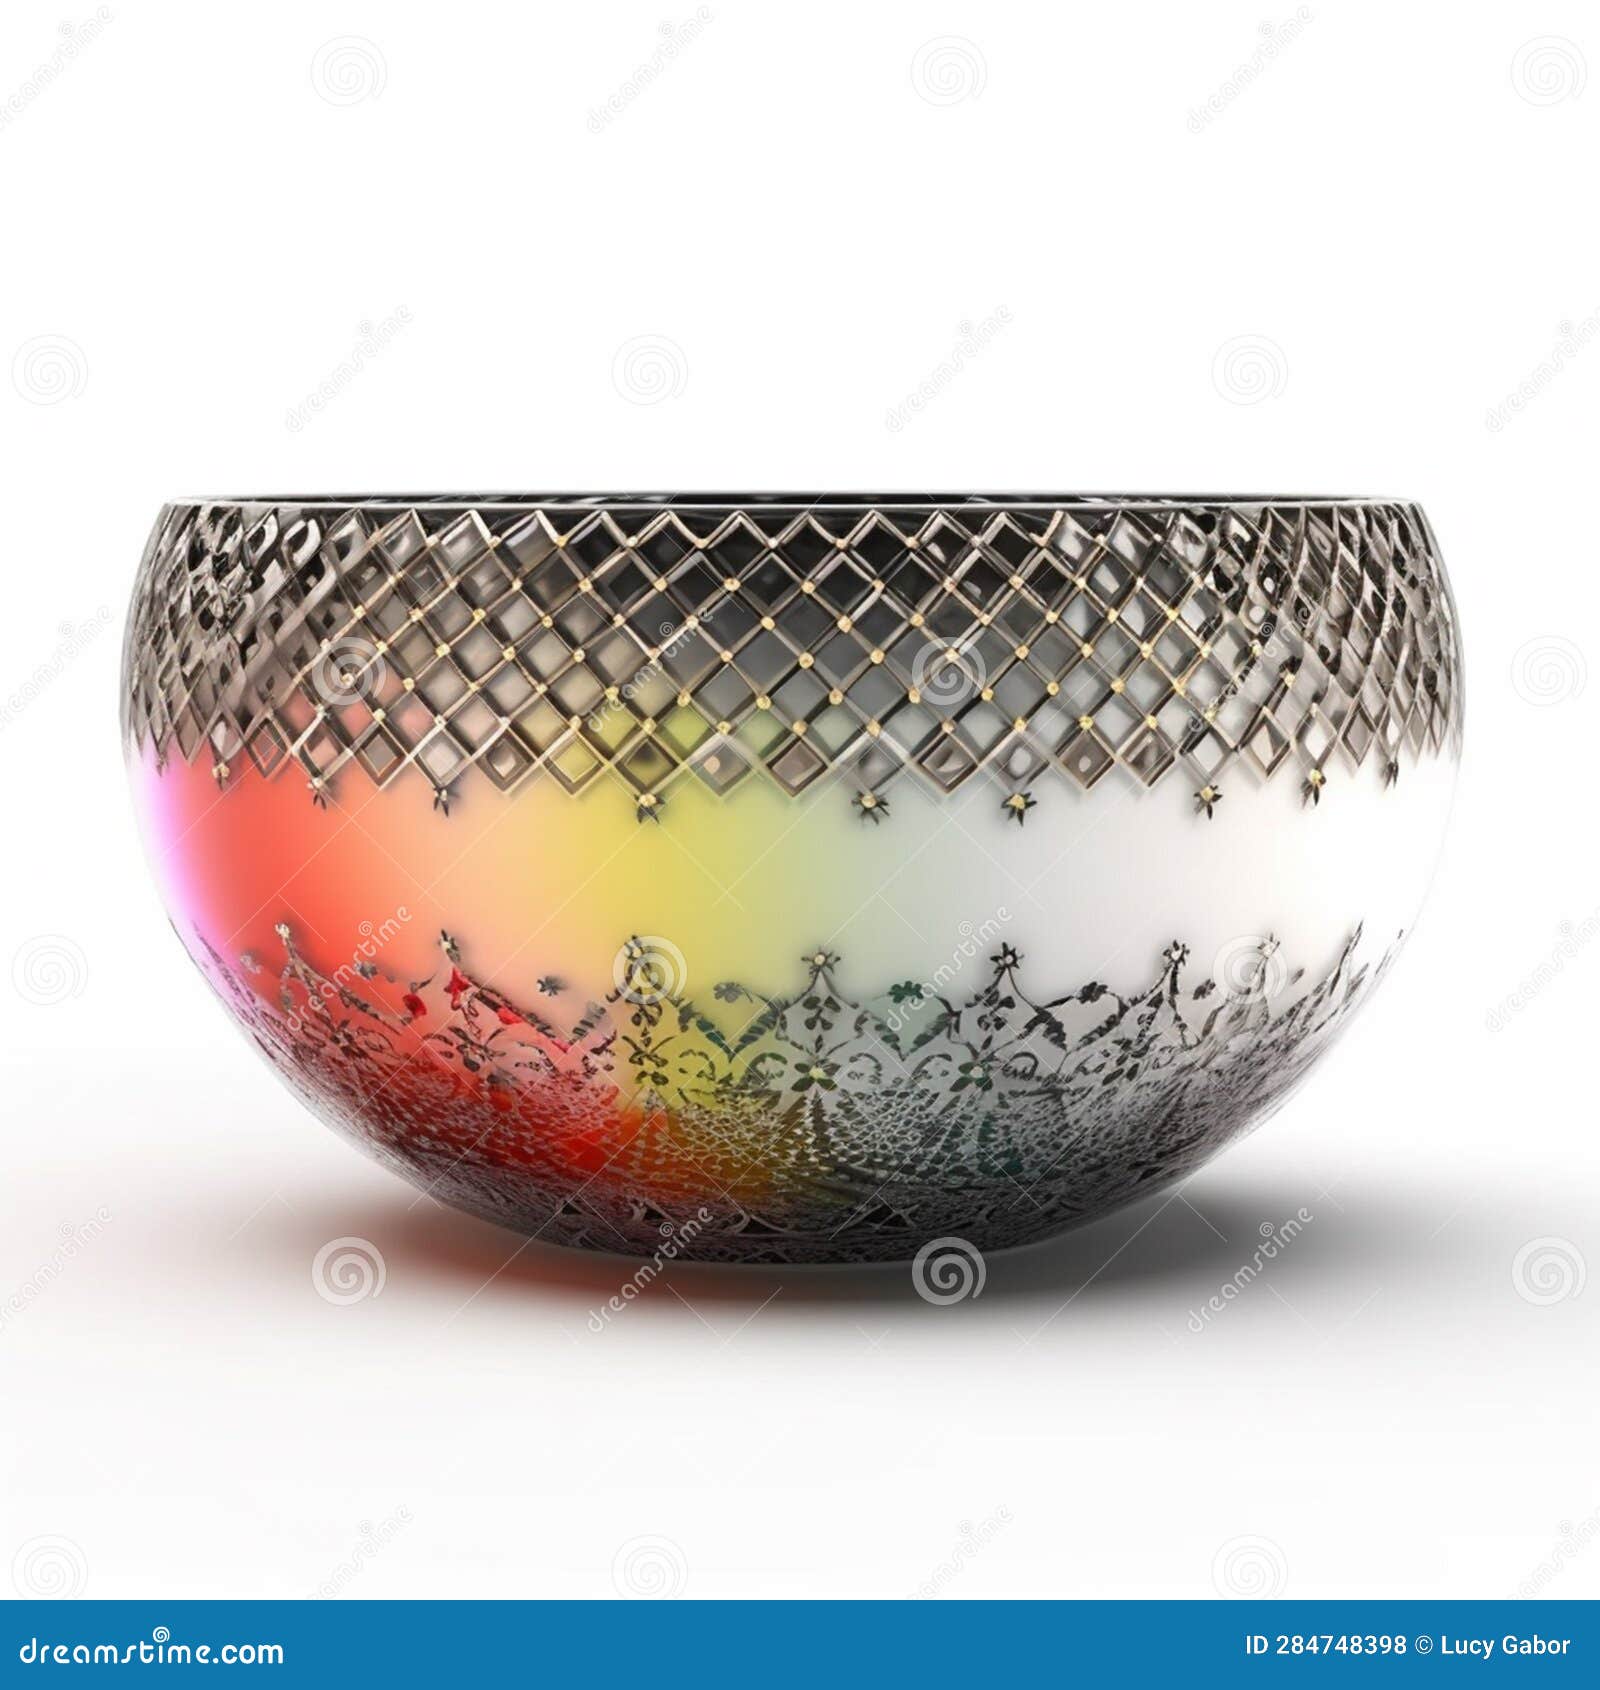 a small bowl with boheme decoration on white background